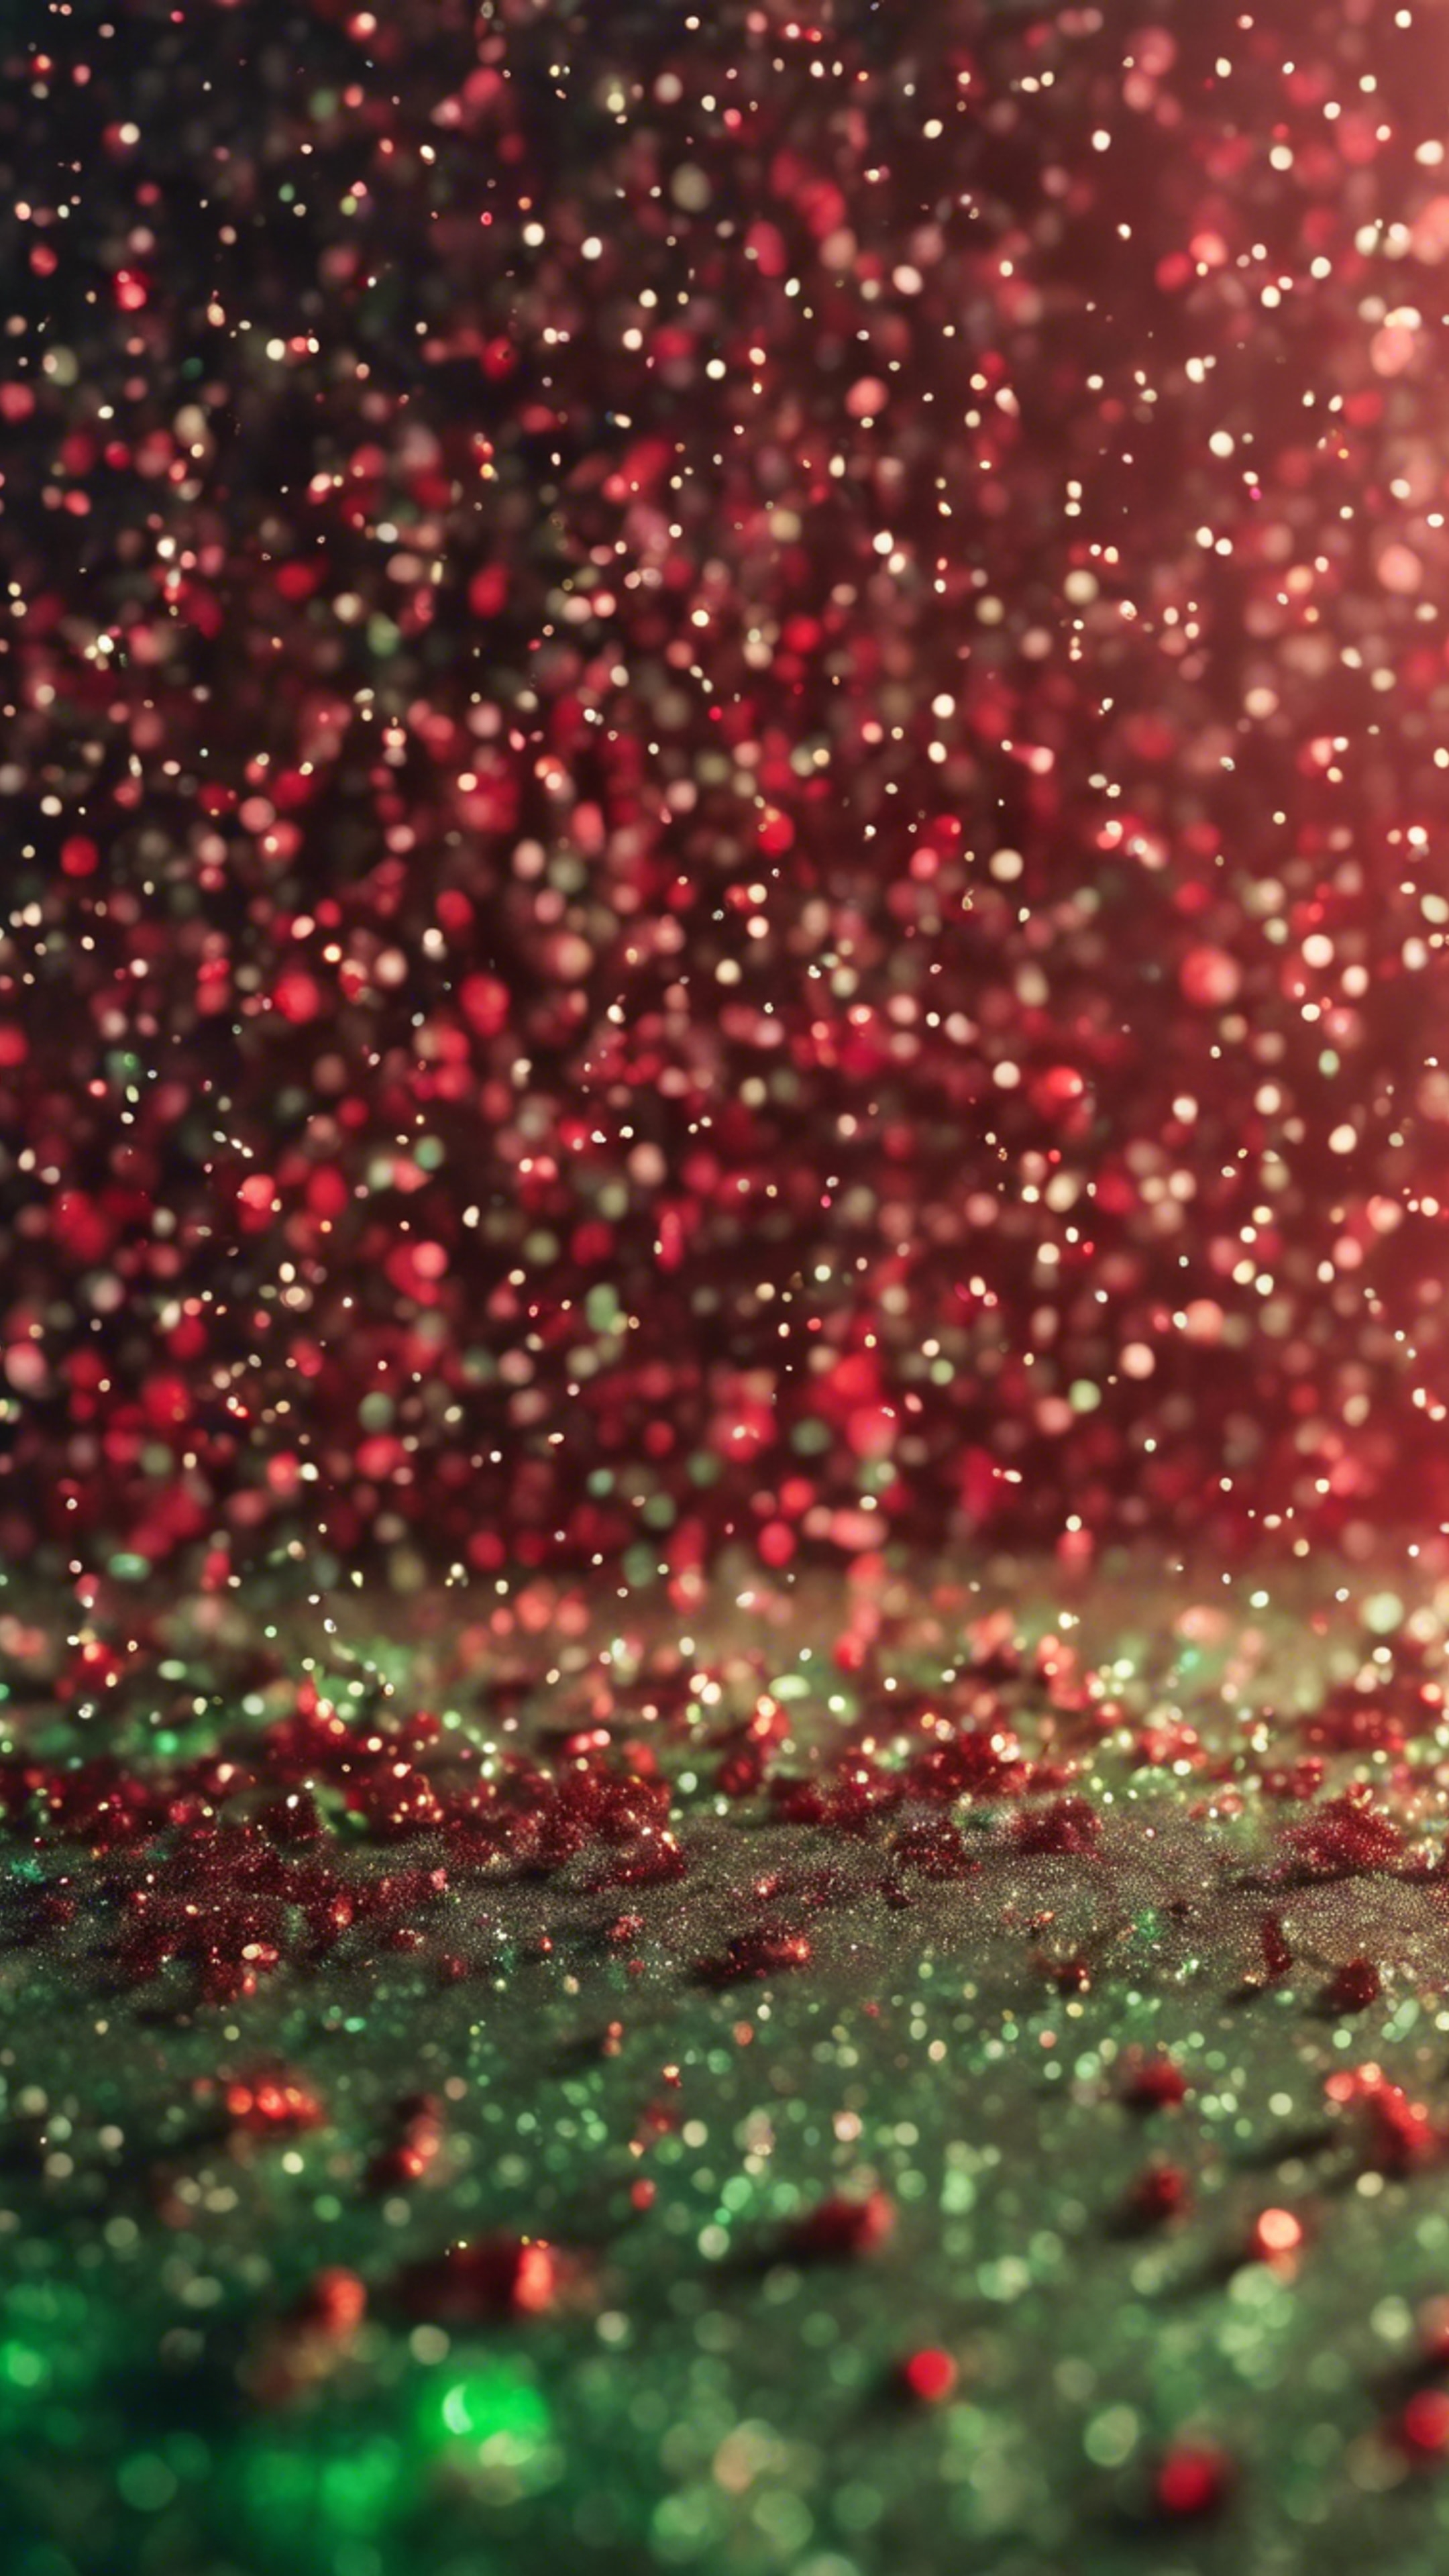 Tiny green and red glitter particles scattered randomly Wallpaper[e9e8f5a2023d489ba4c1]